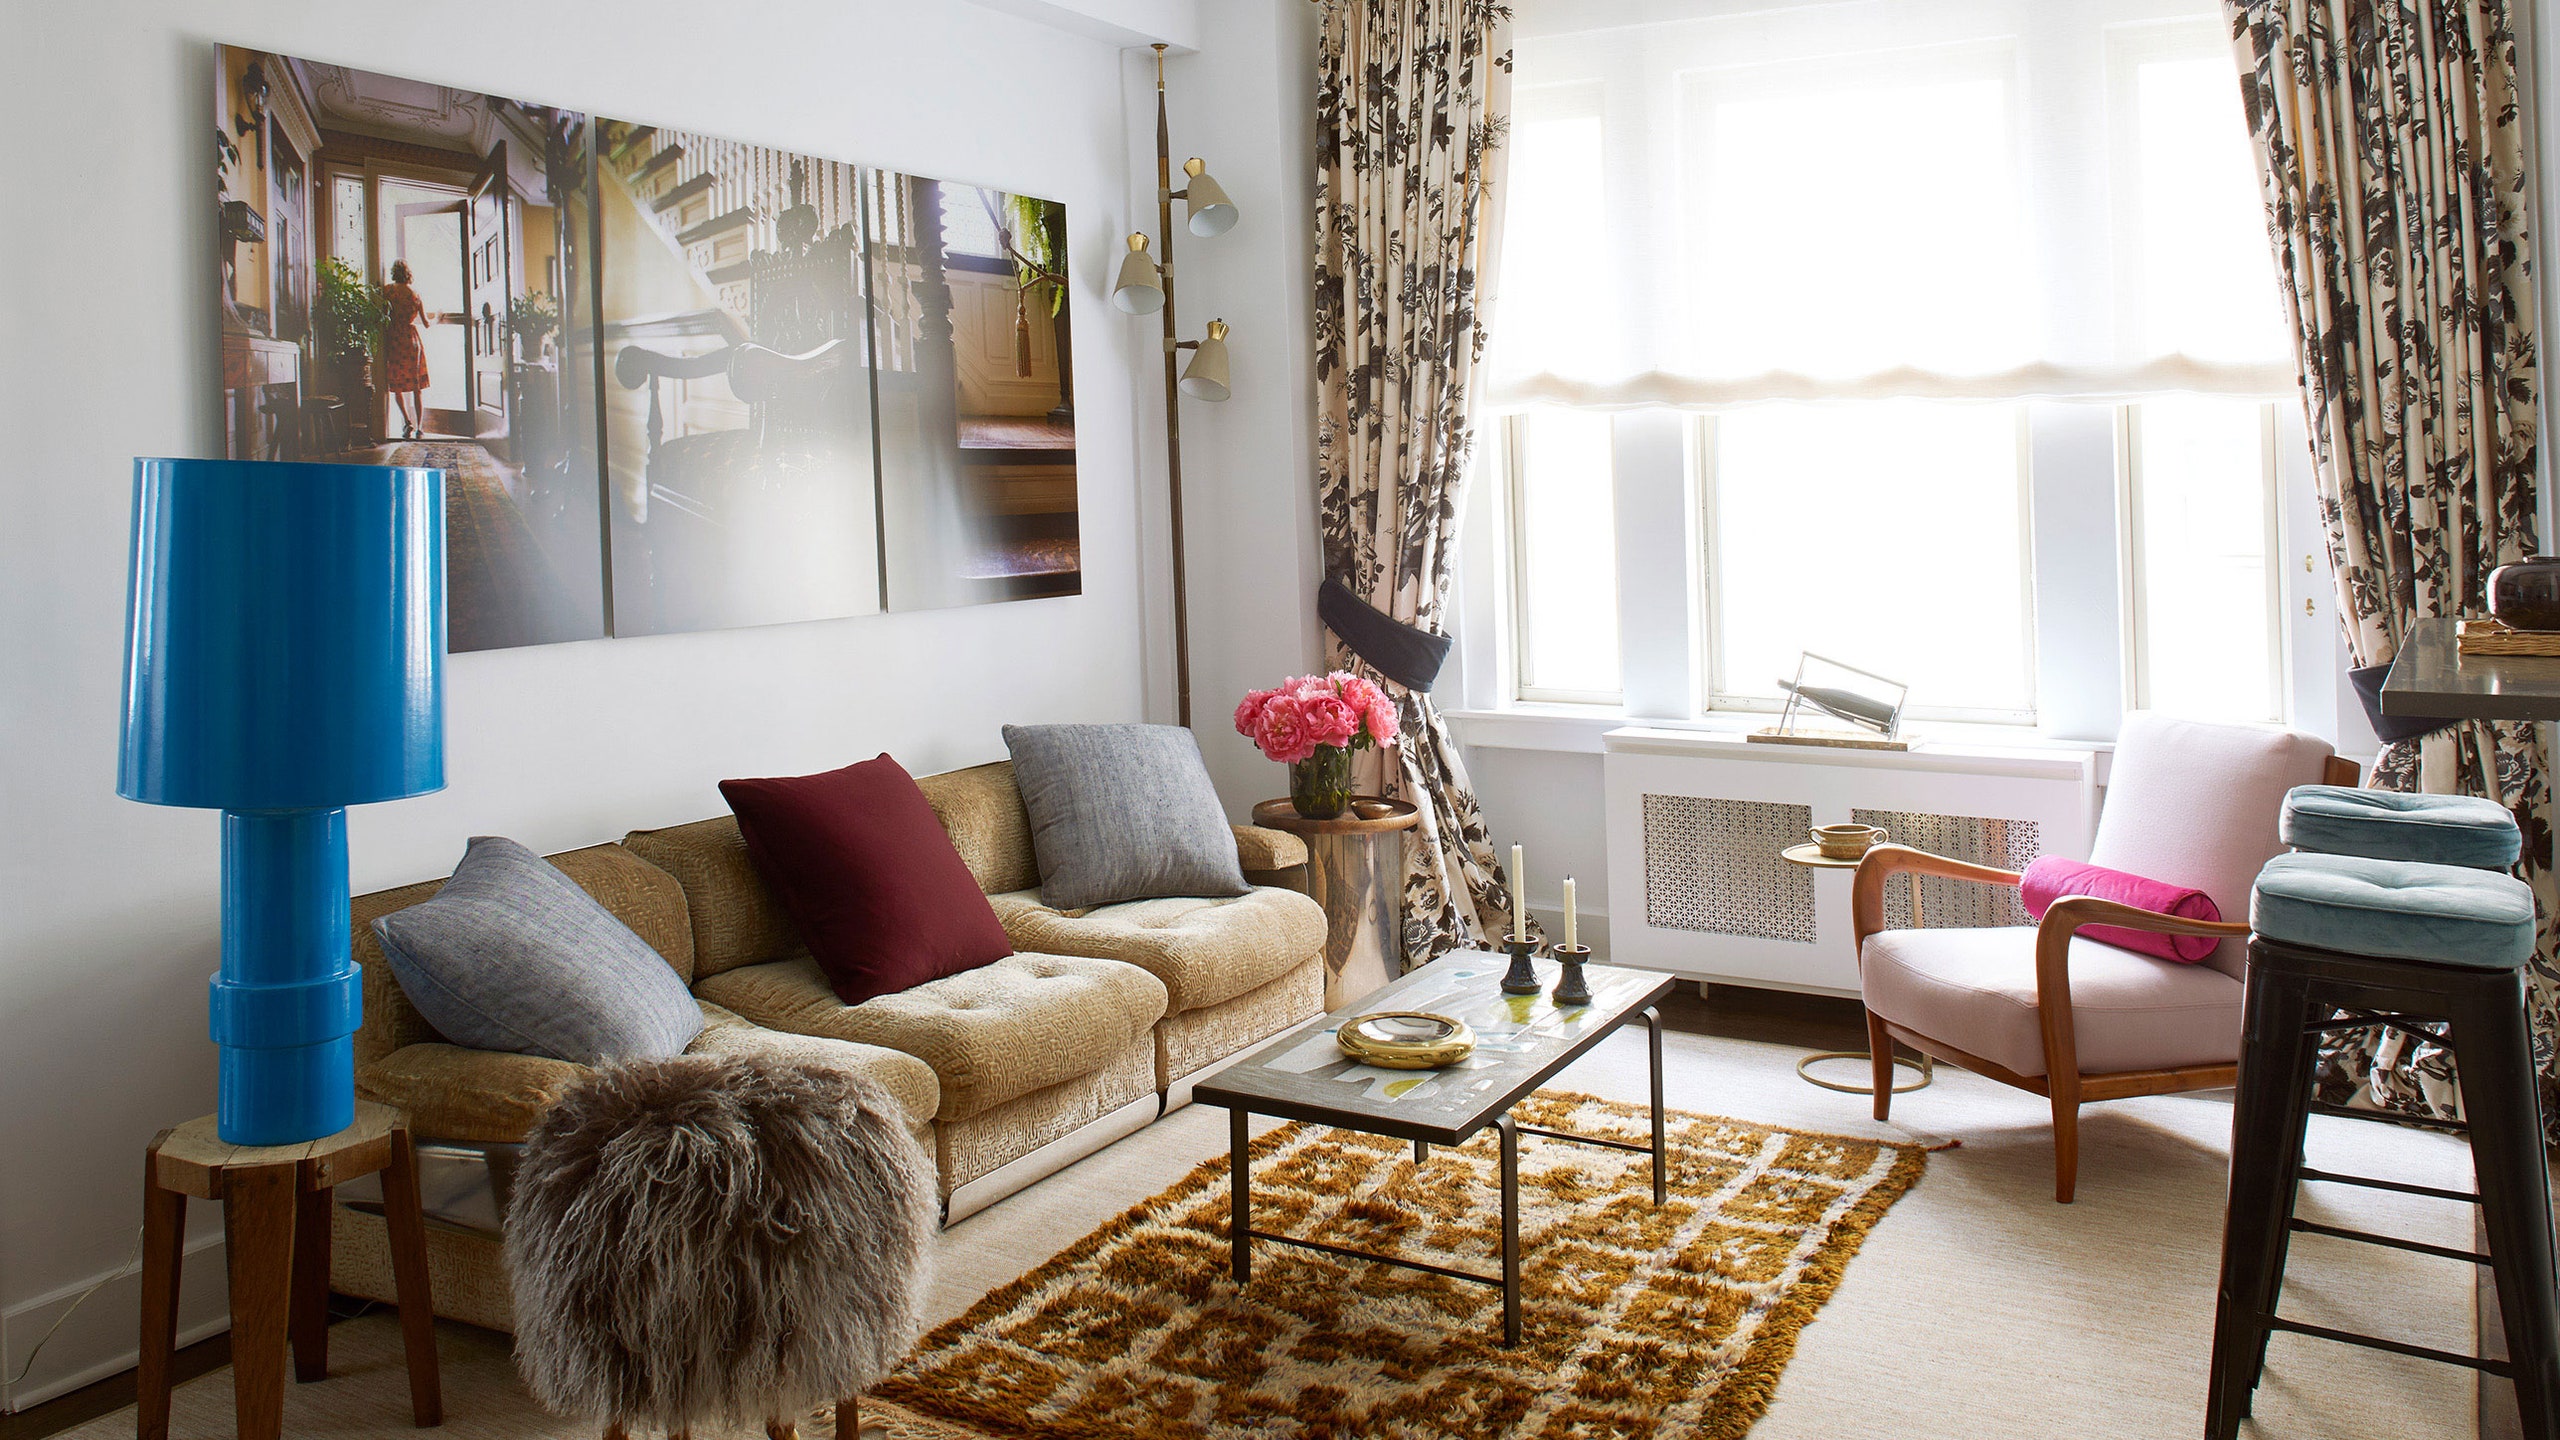 Earn a little more money and design a chic rental space